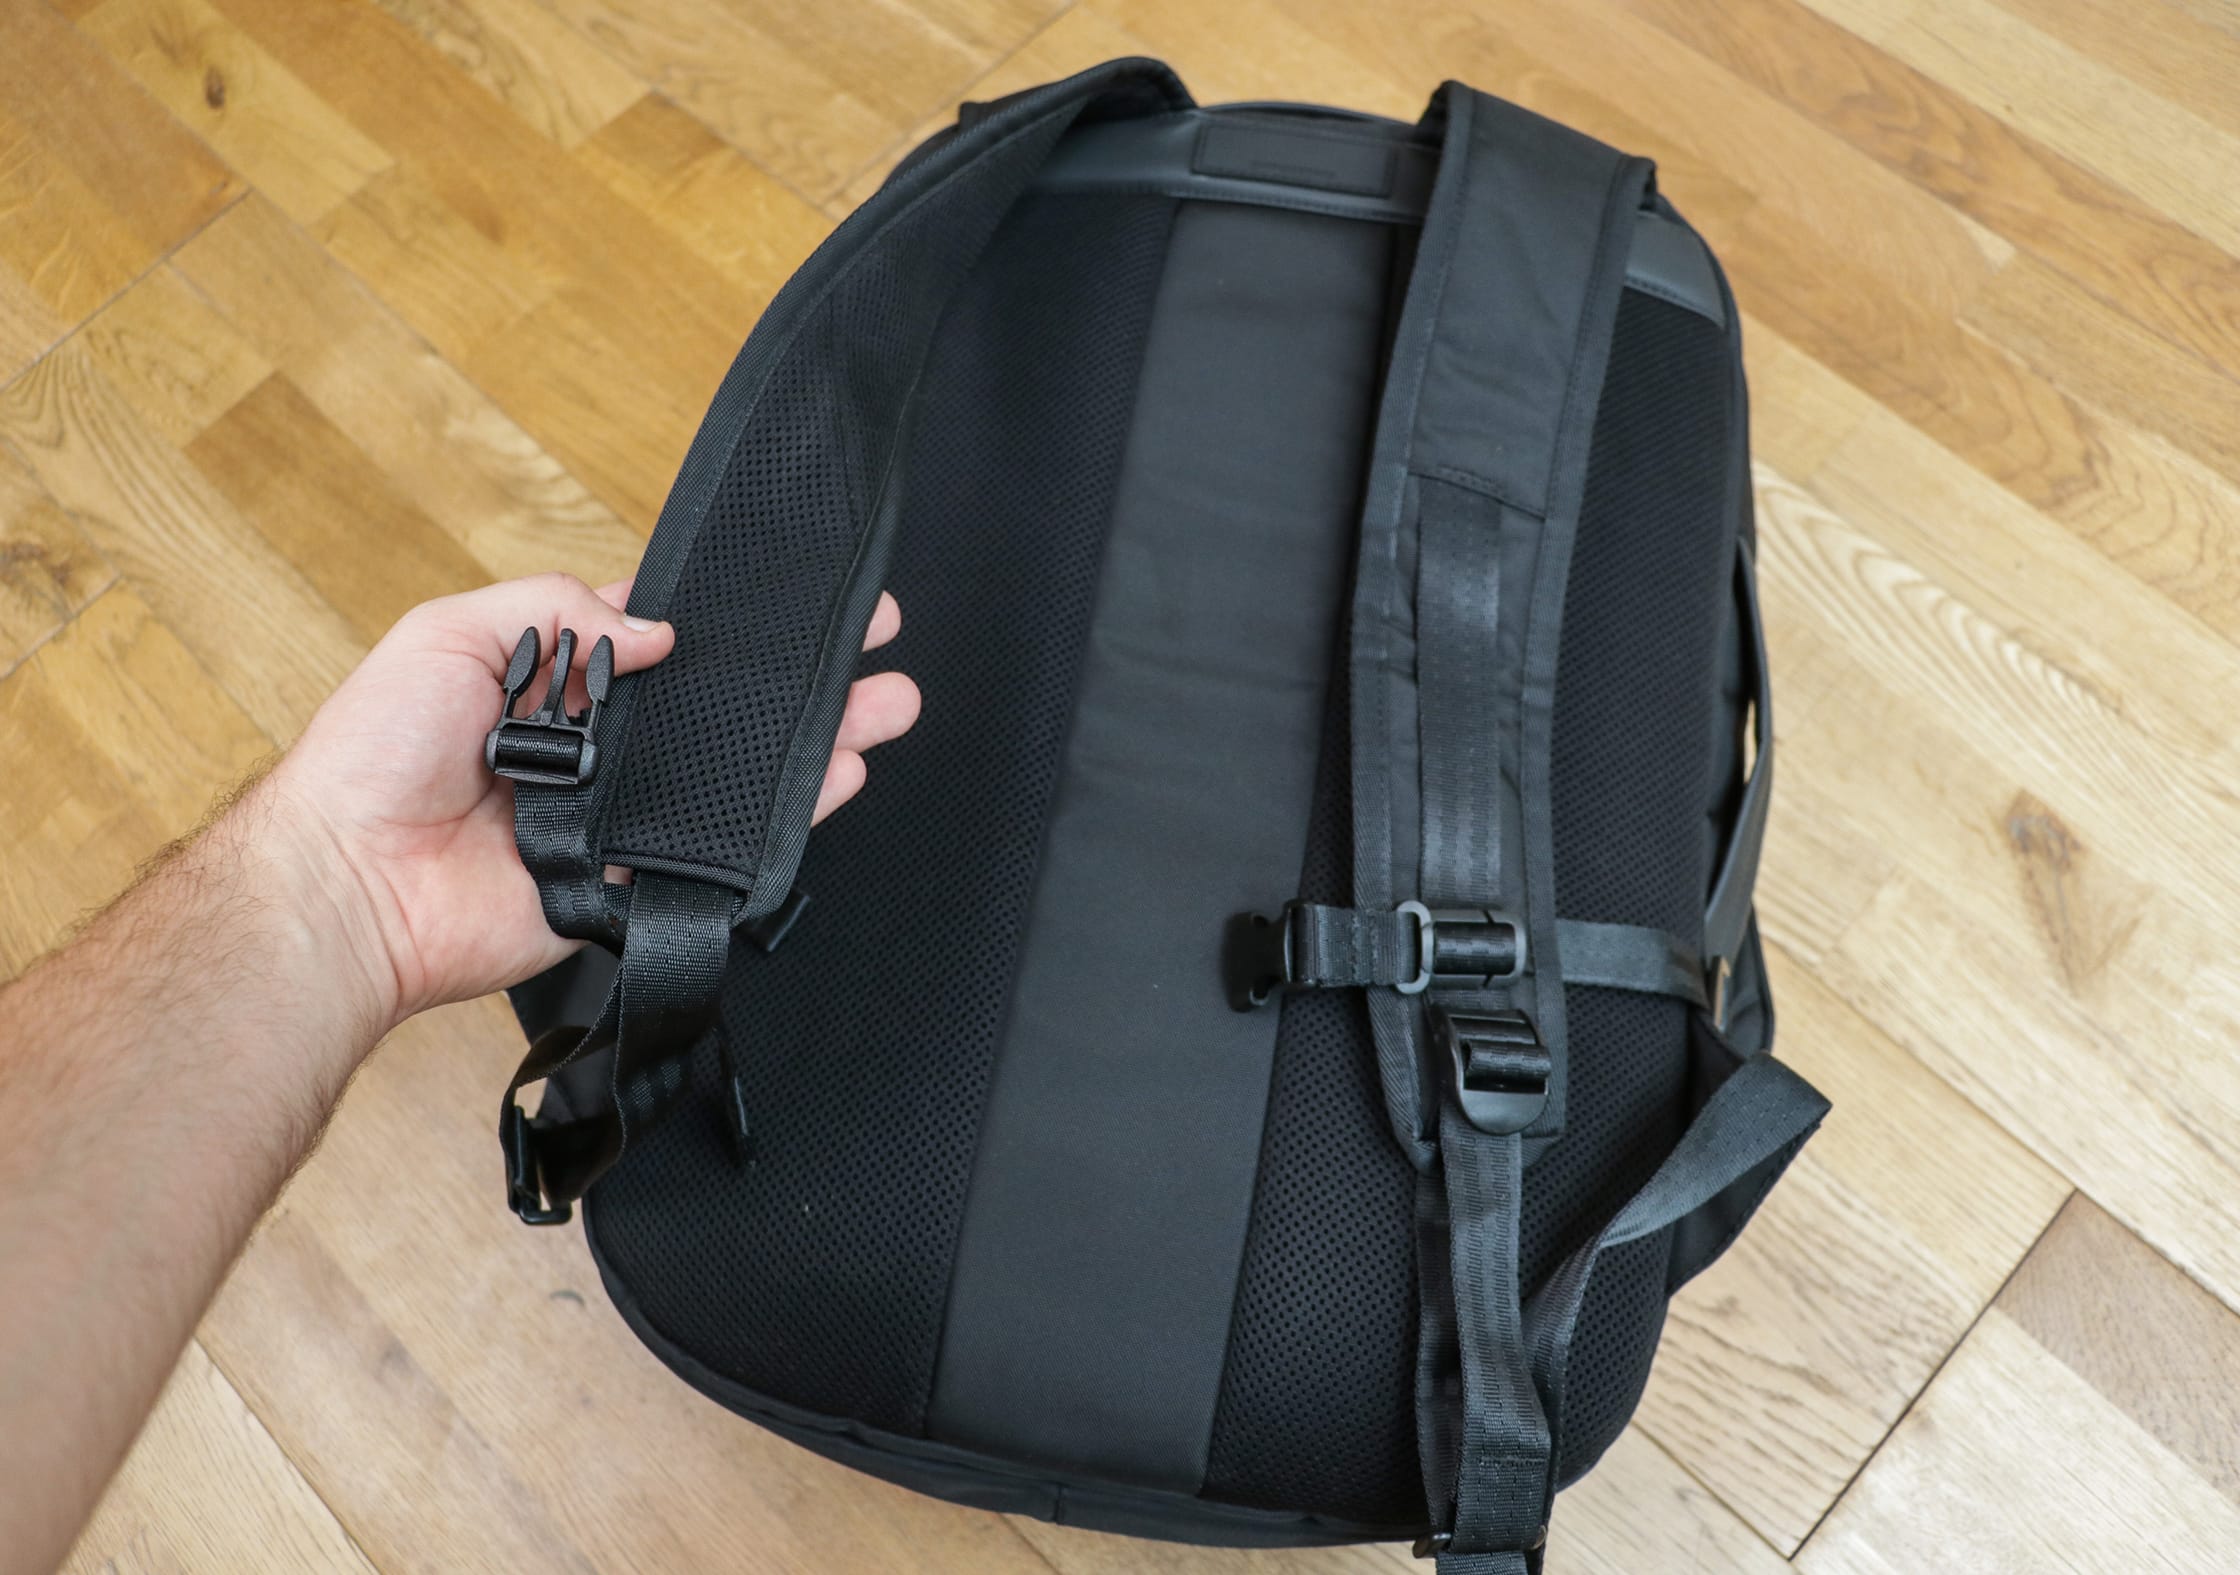 OPPOSETHIS Invisible Carry-On Shoulder Straps & Back Padding